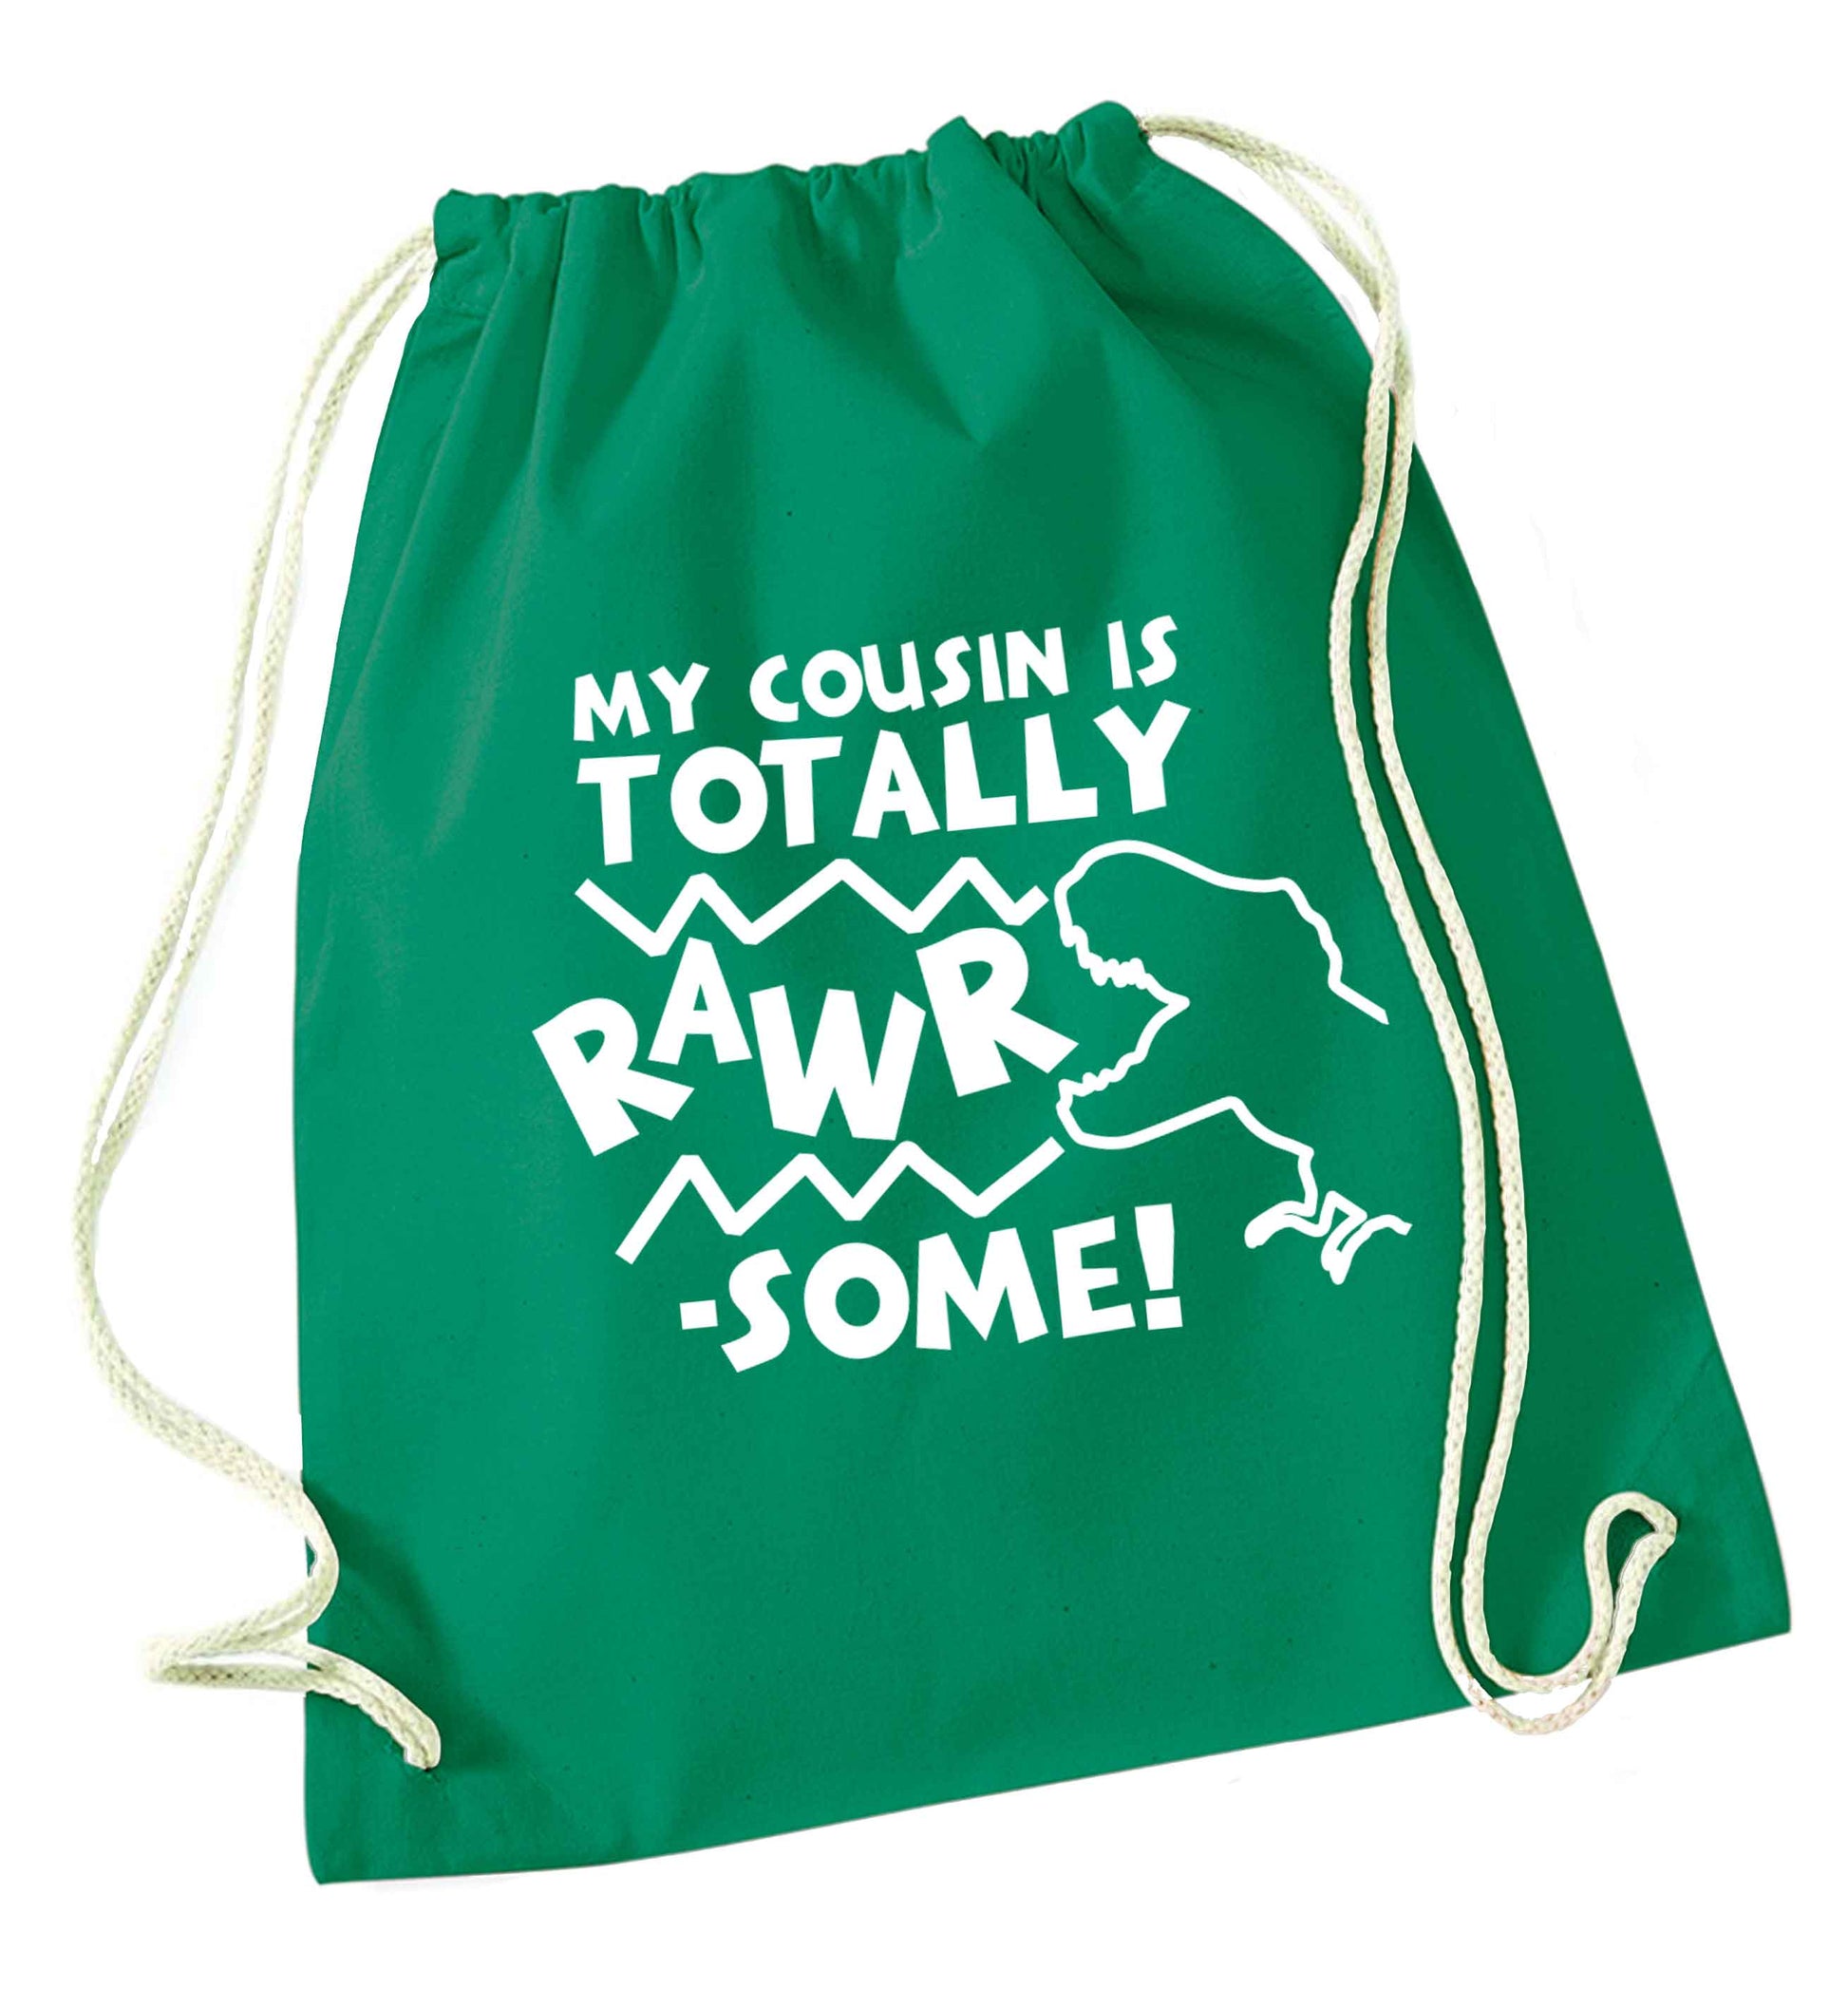 My cousin is totally rawrsome green drawstring bag